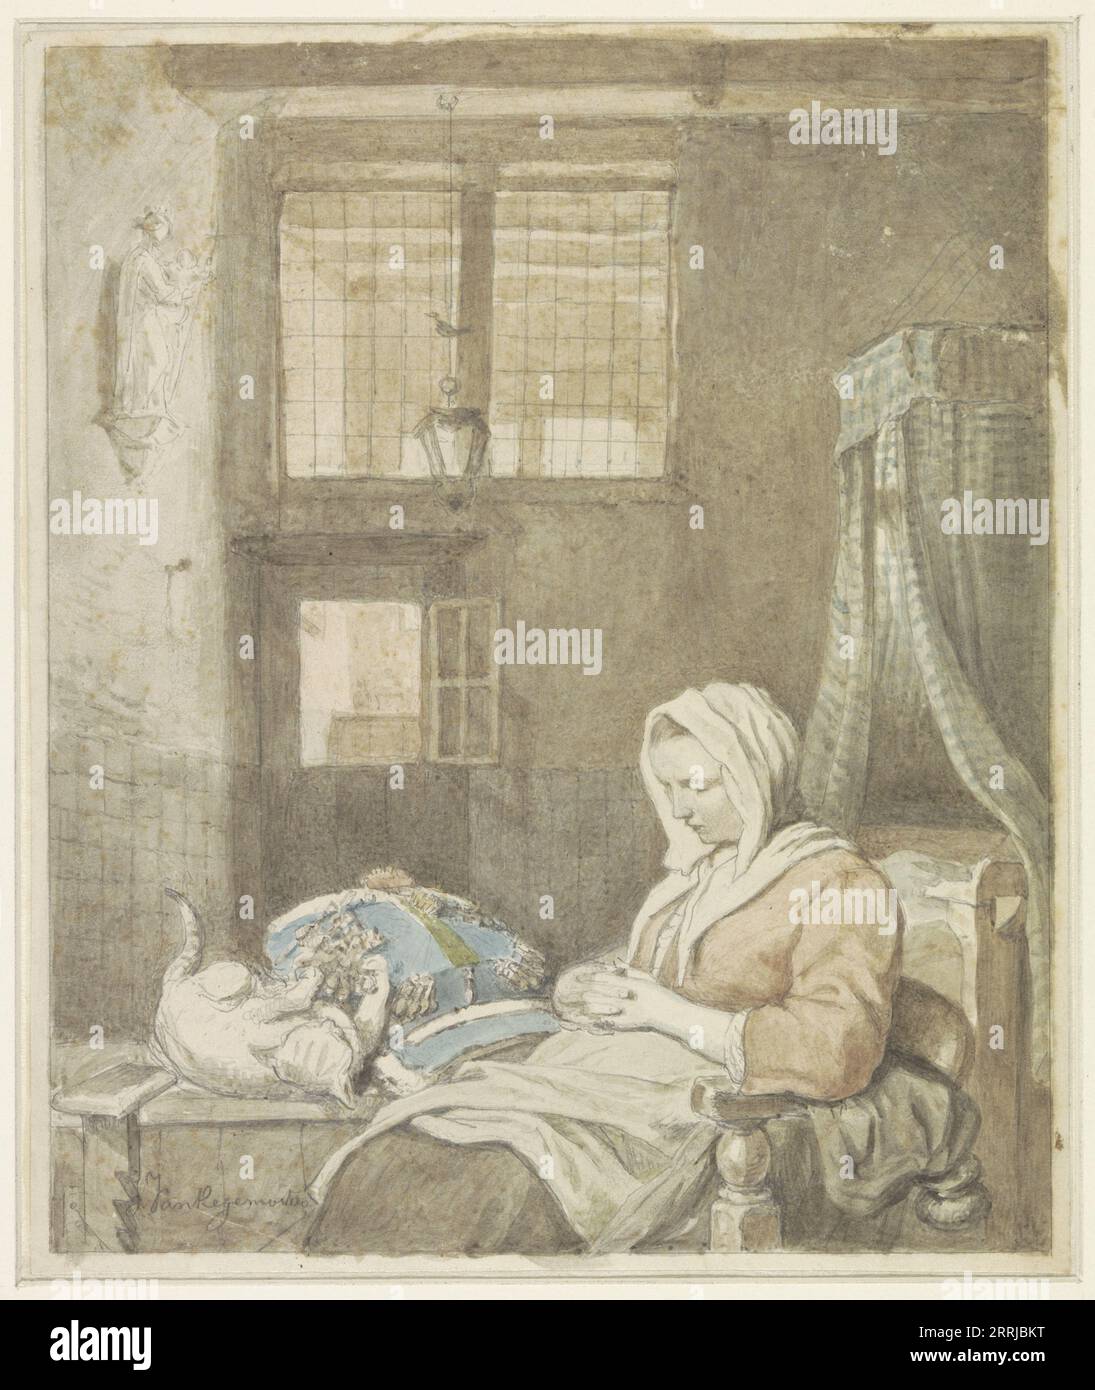 The sleeping lace worker, 1795-1873. Woman dozing as a cat tangles the threads of her lace work. Design for a print. Stock Photo